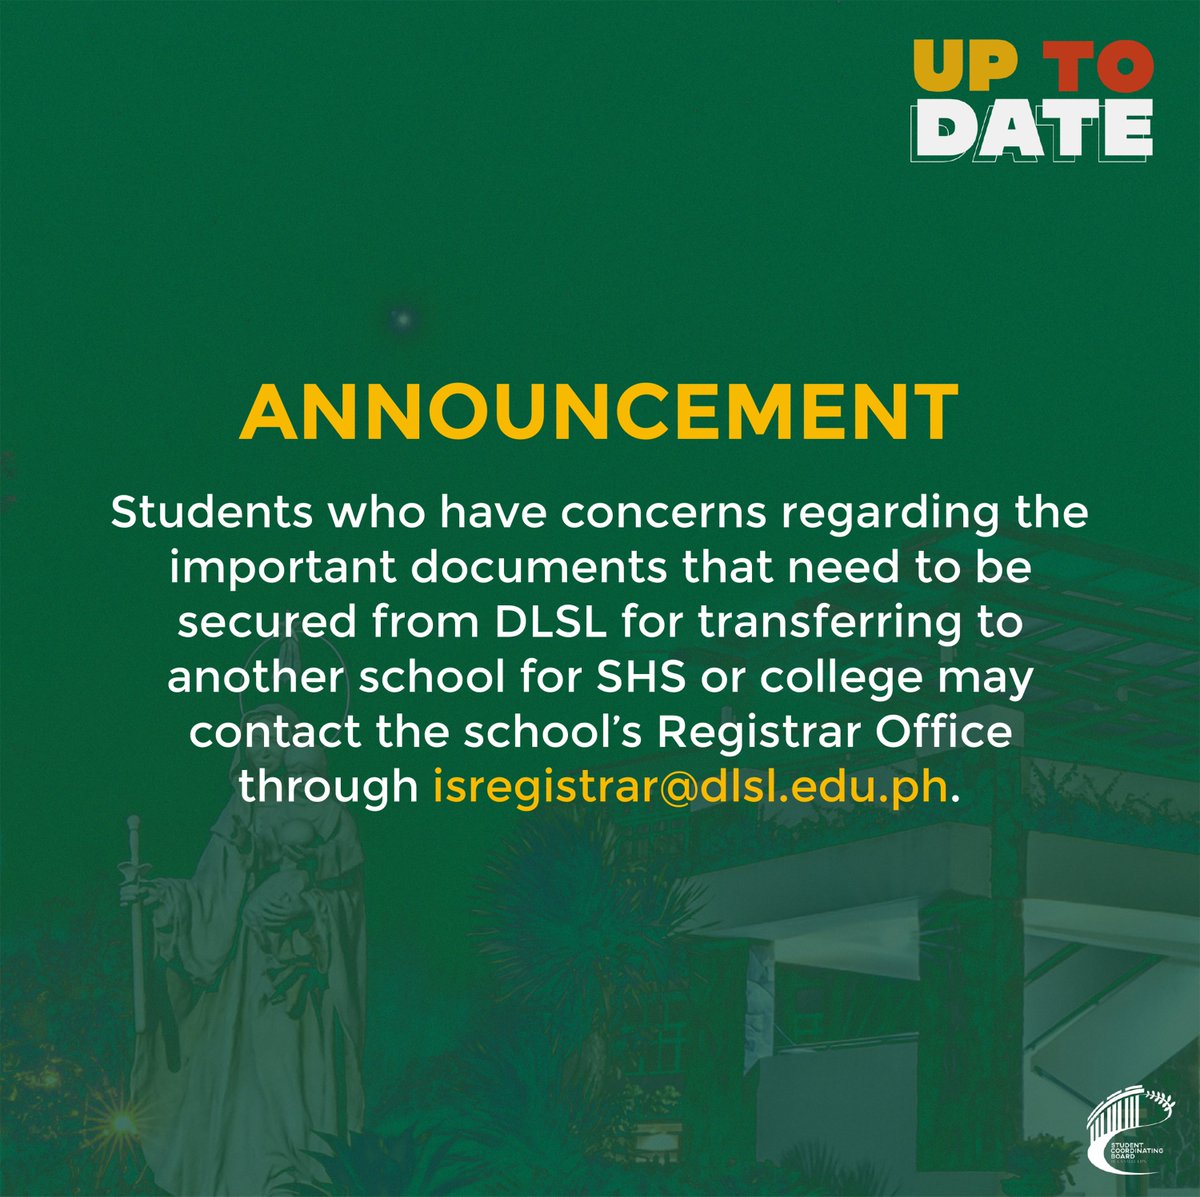 For IS document requests and all other Registrar's concerns, kindly email isregistrar@dlsl.edu.ph.